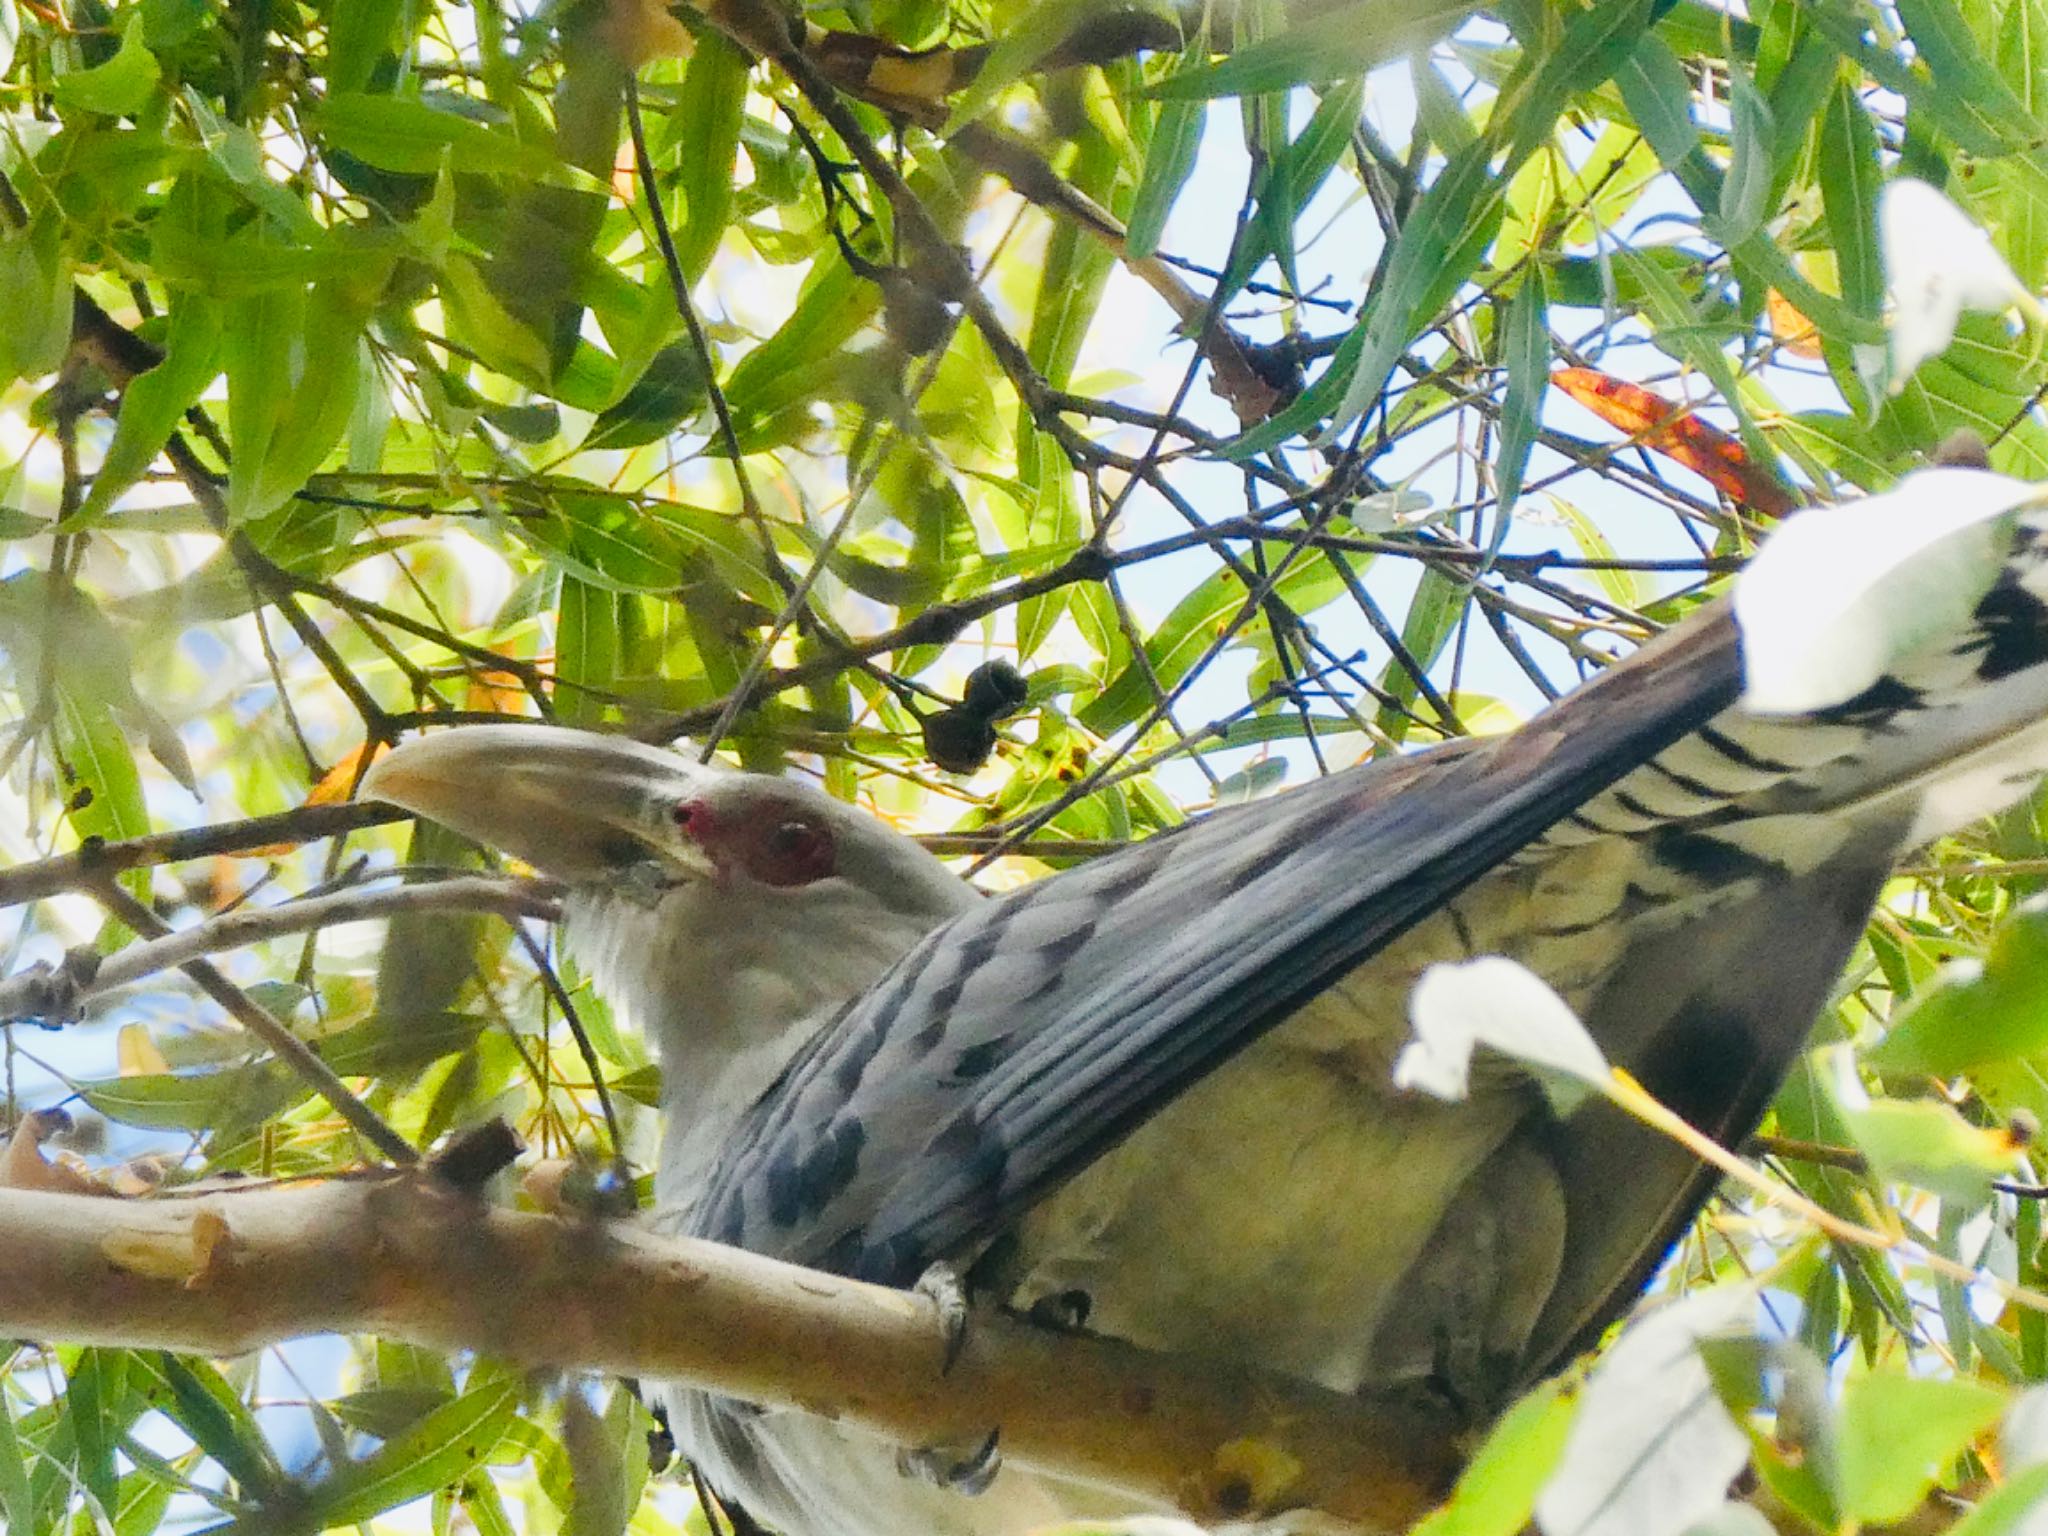 Photo of Channel-billed Cuckoo at Mowbray Park, Lane Cove North, NSW, Australia by Maki